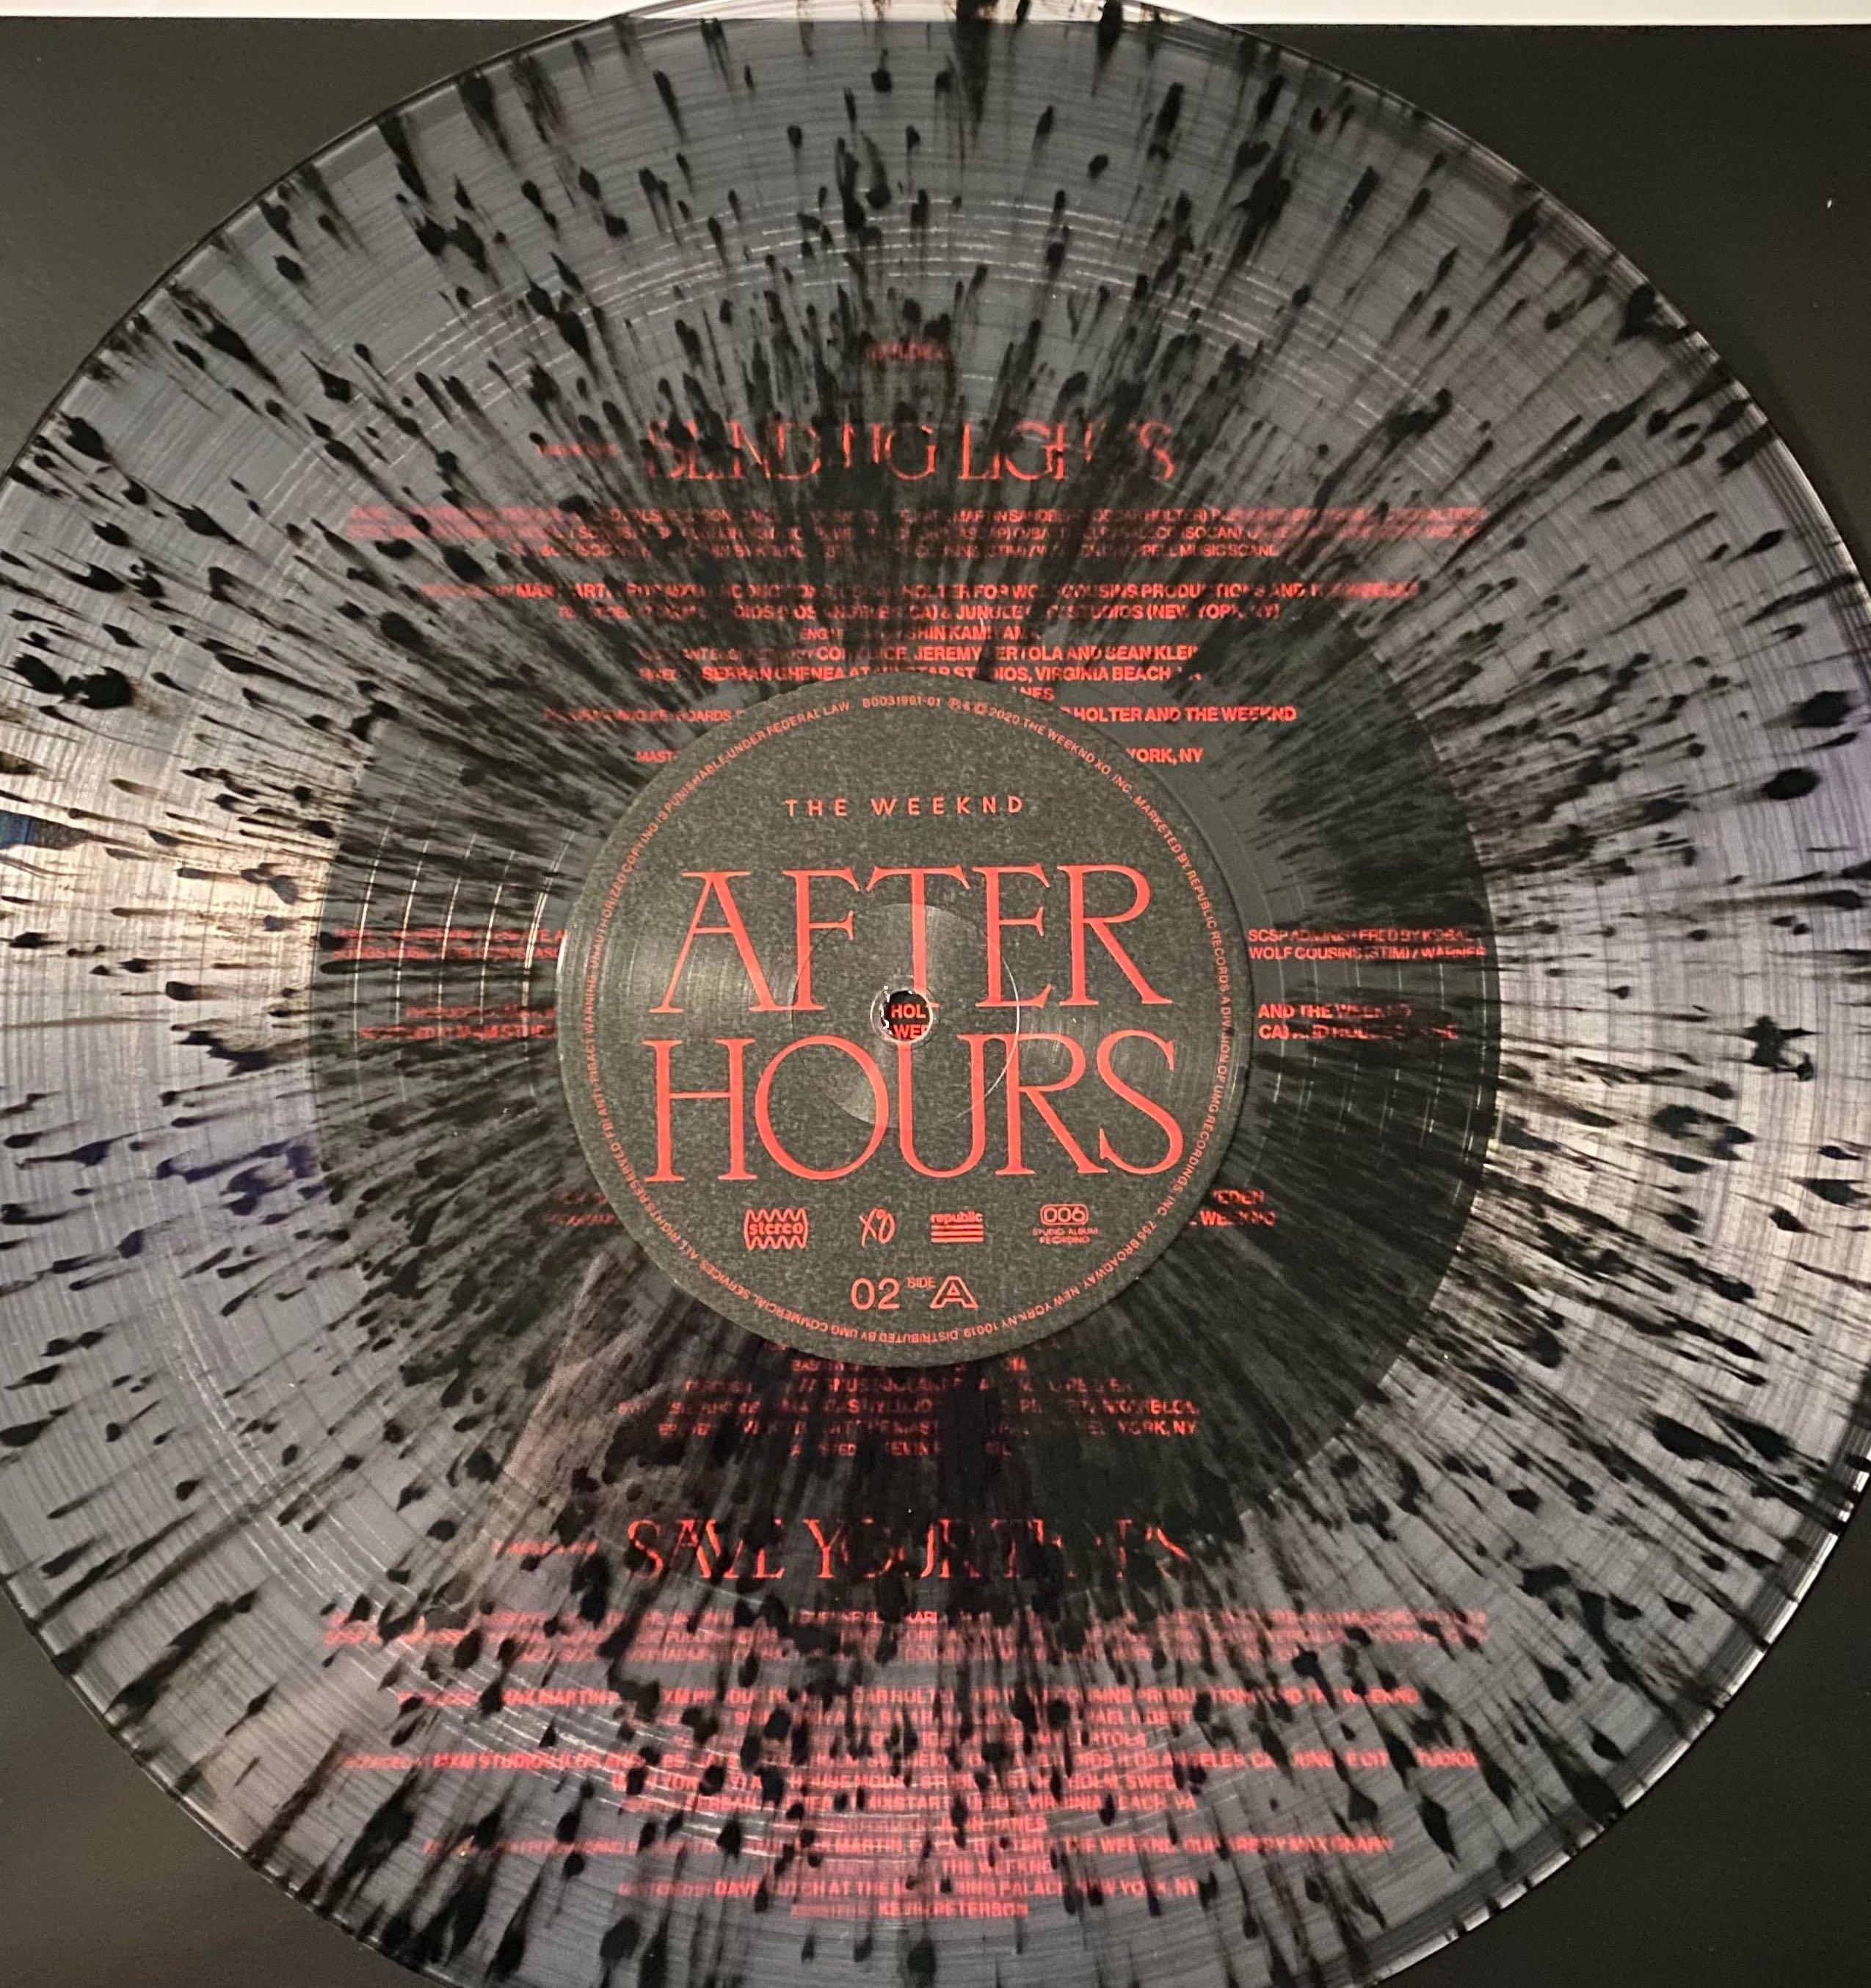 The Weeknd - After Hours (black vinyl) – Rustic Records